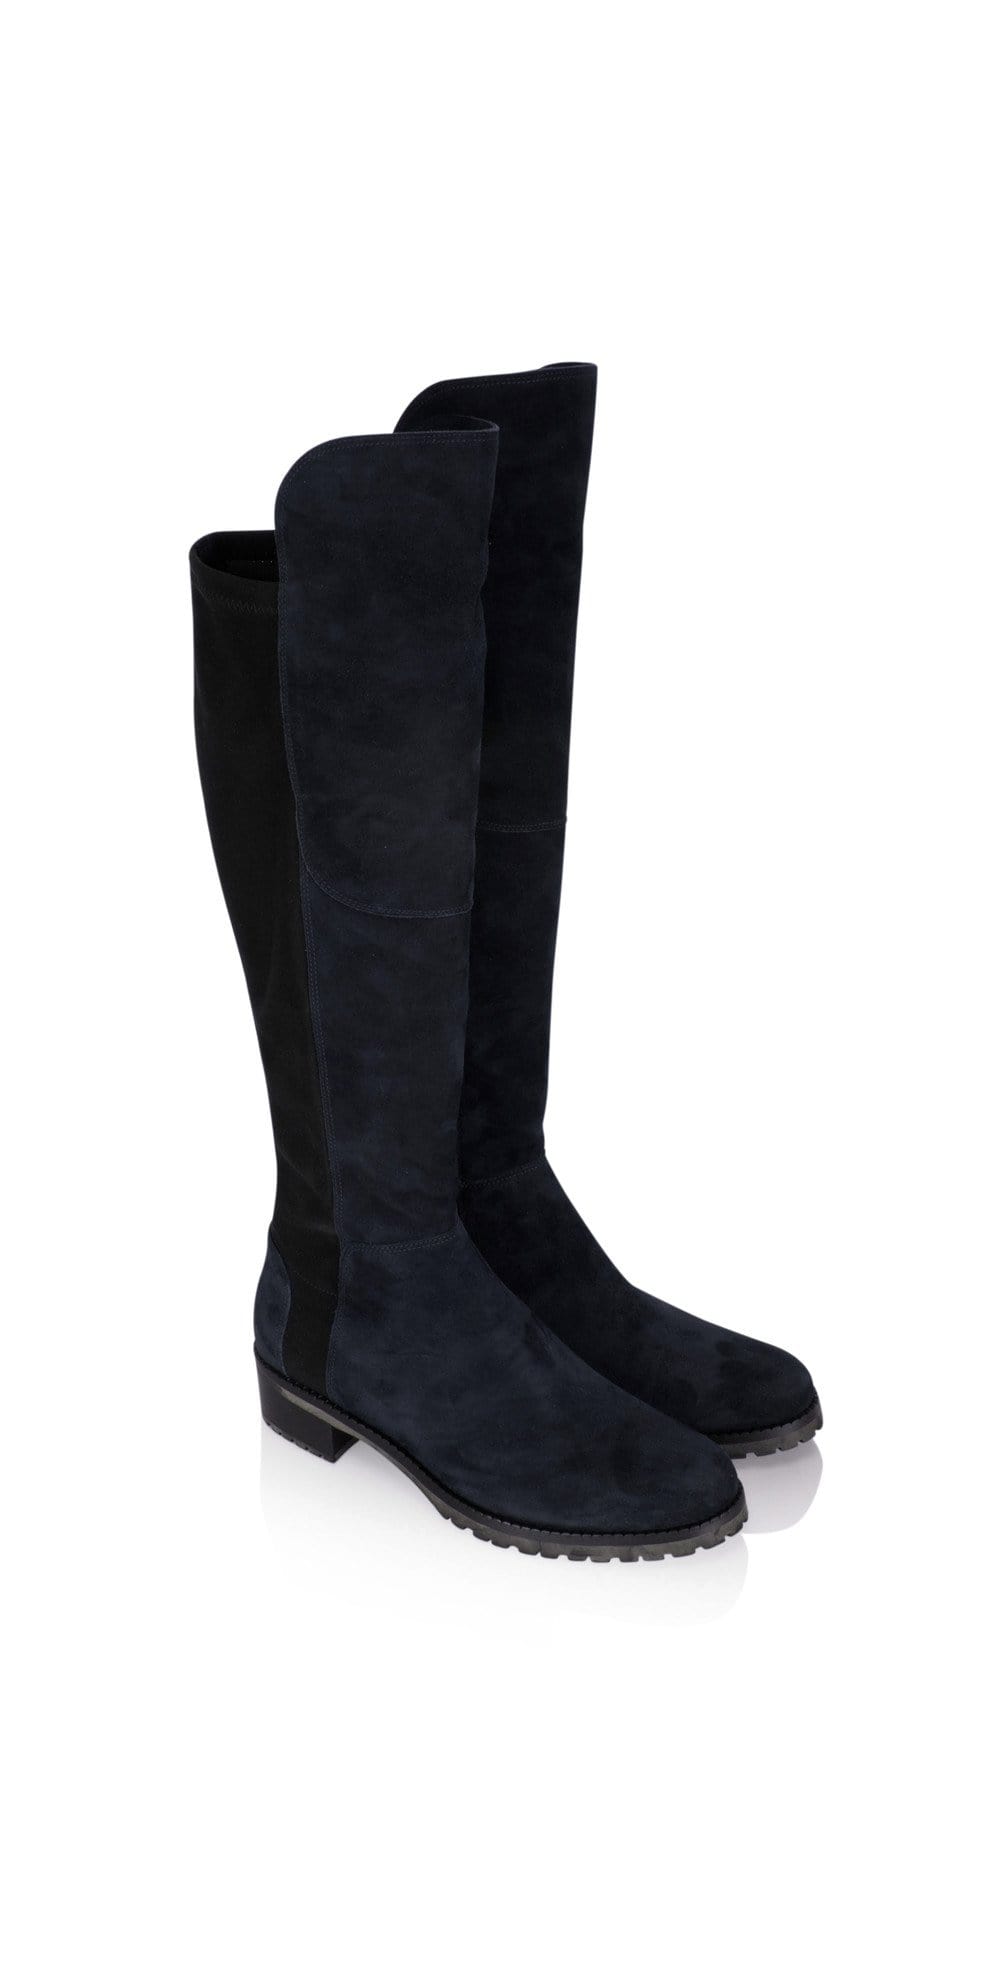 Kennel &amp; Schmenger Shoes Kennel &amp; Schmenger Blues Long Flat Boots in Navy Suede 41-24160-485 izzi-of-baslow